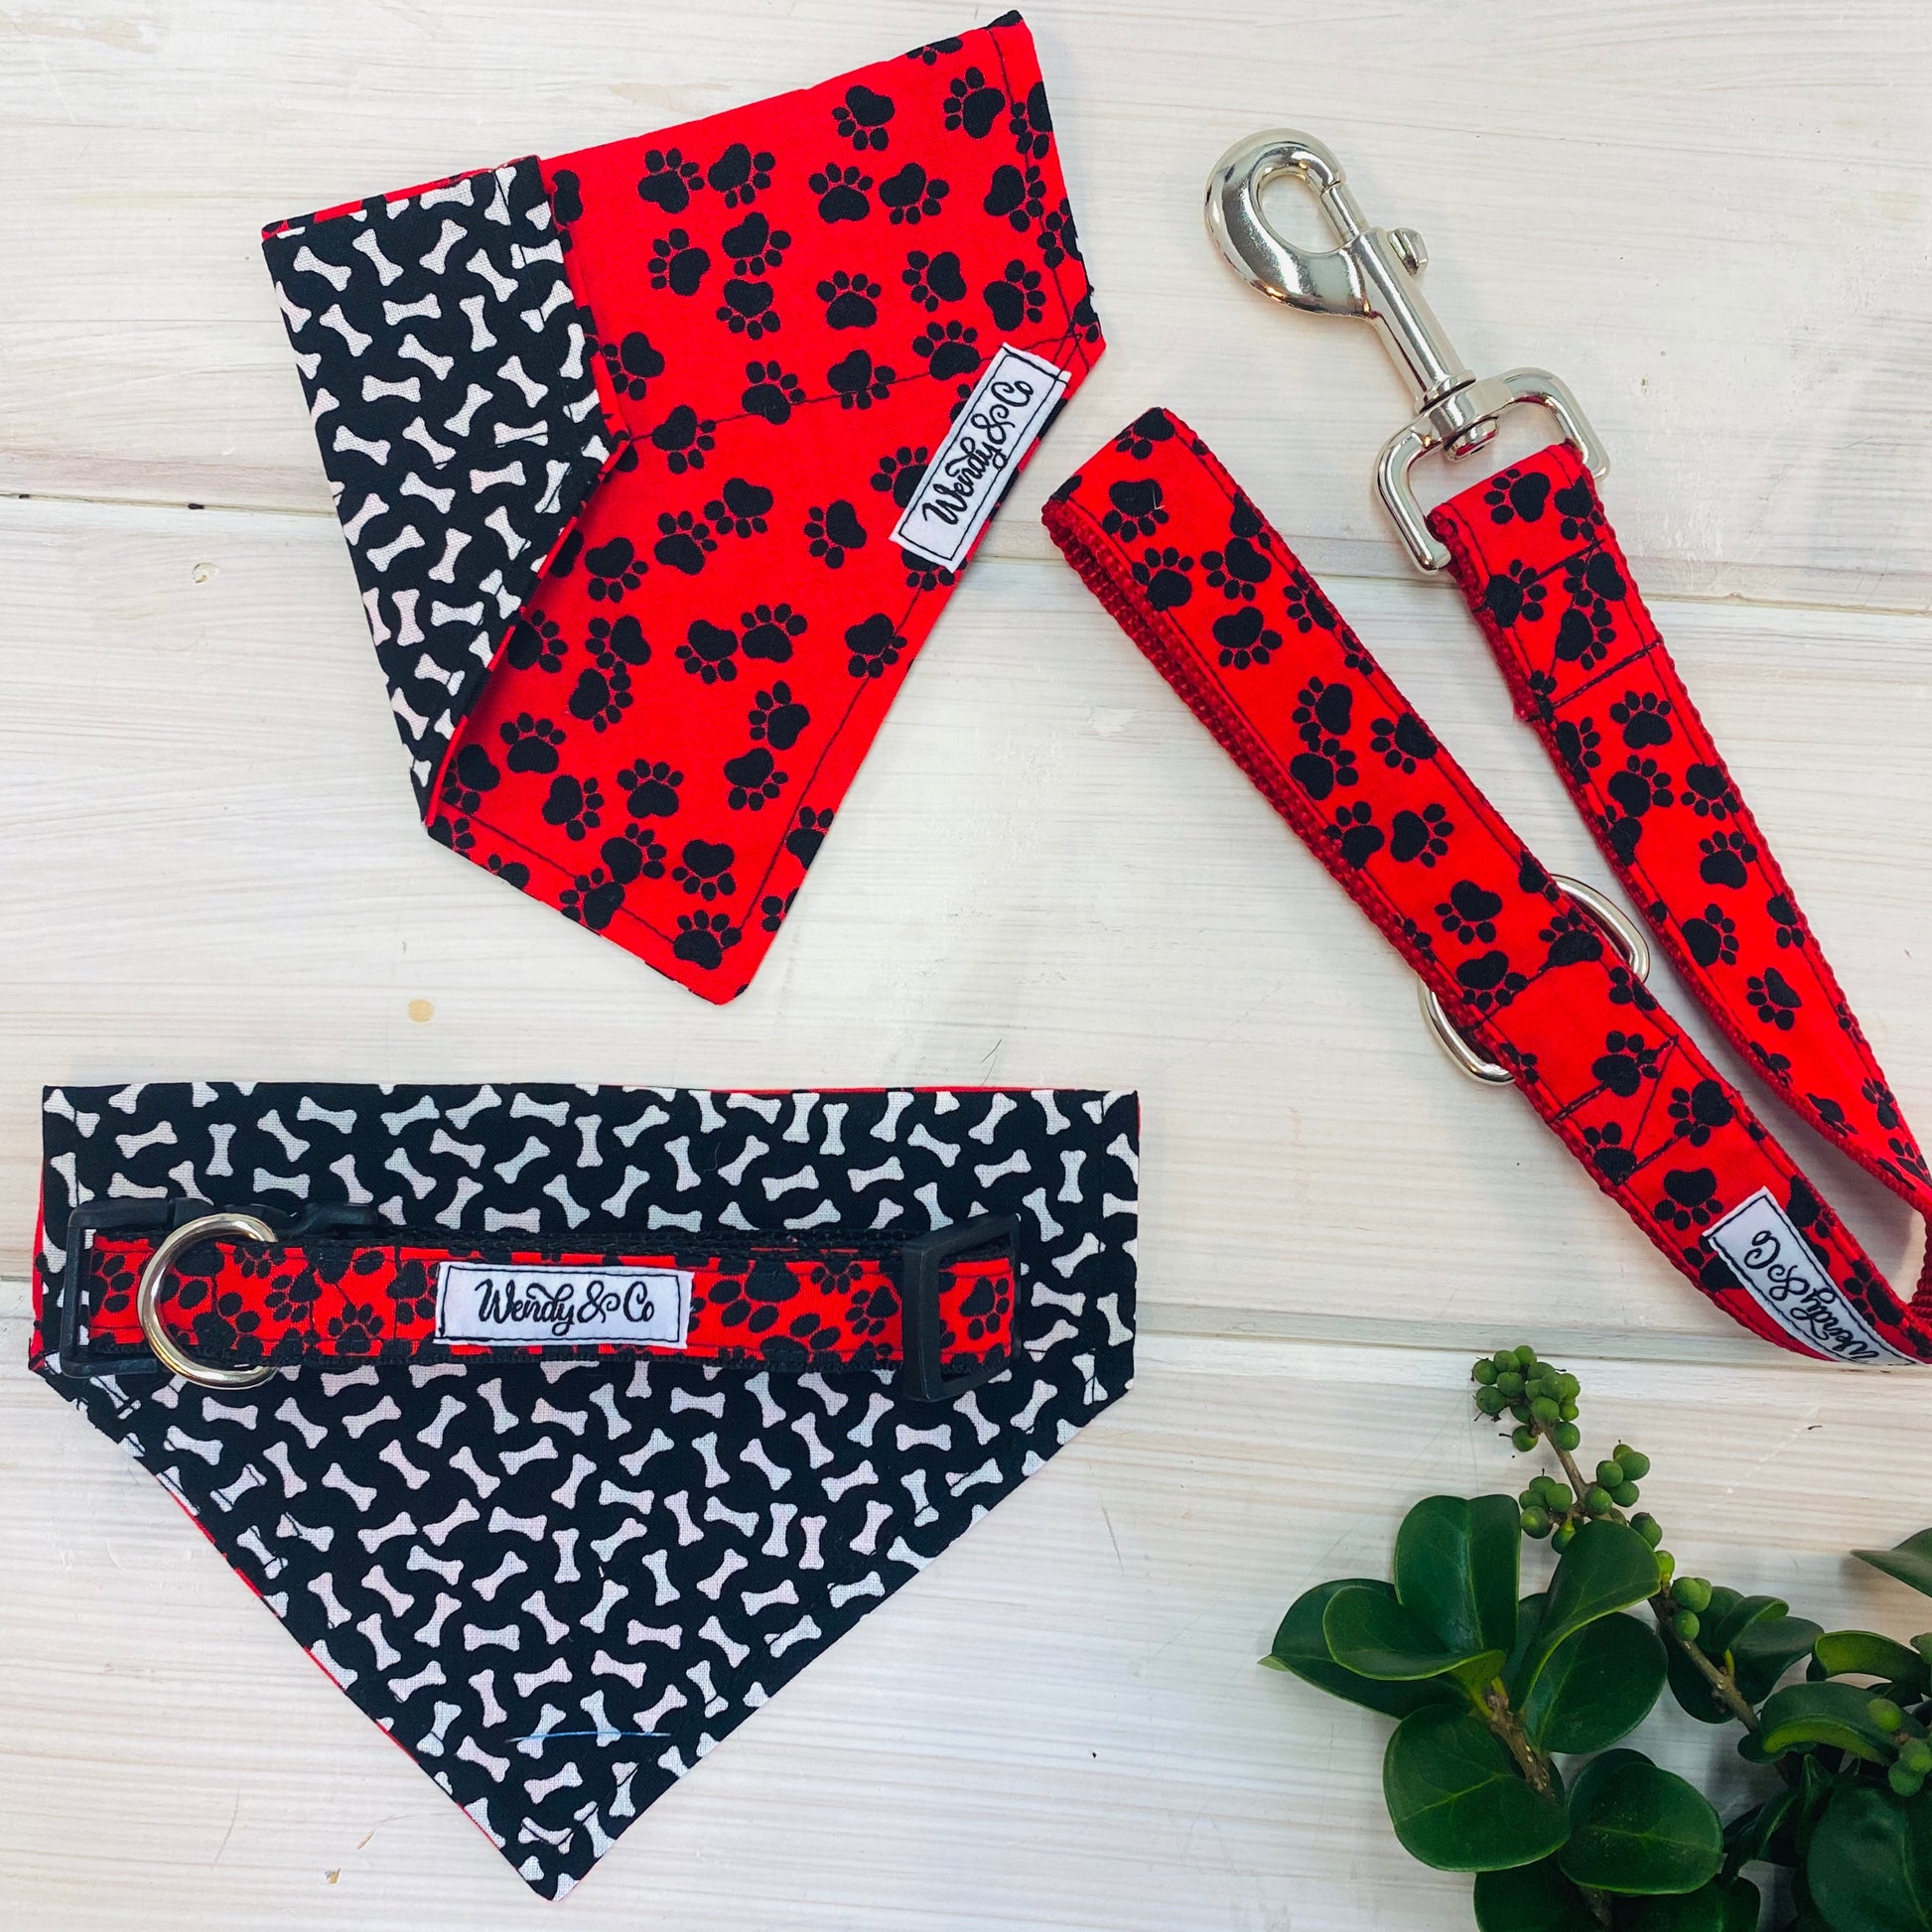 Red with black paws dog bandana, leash and collar.